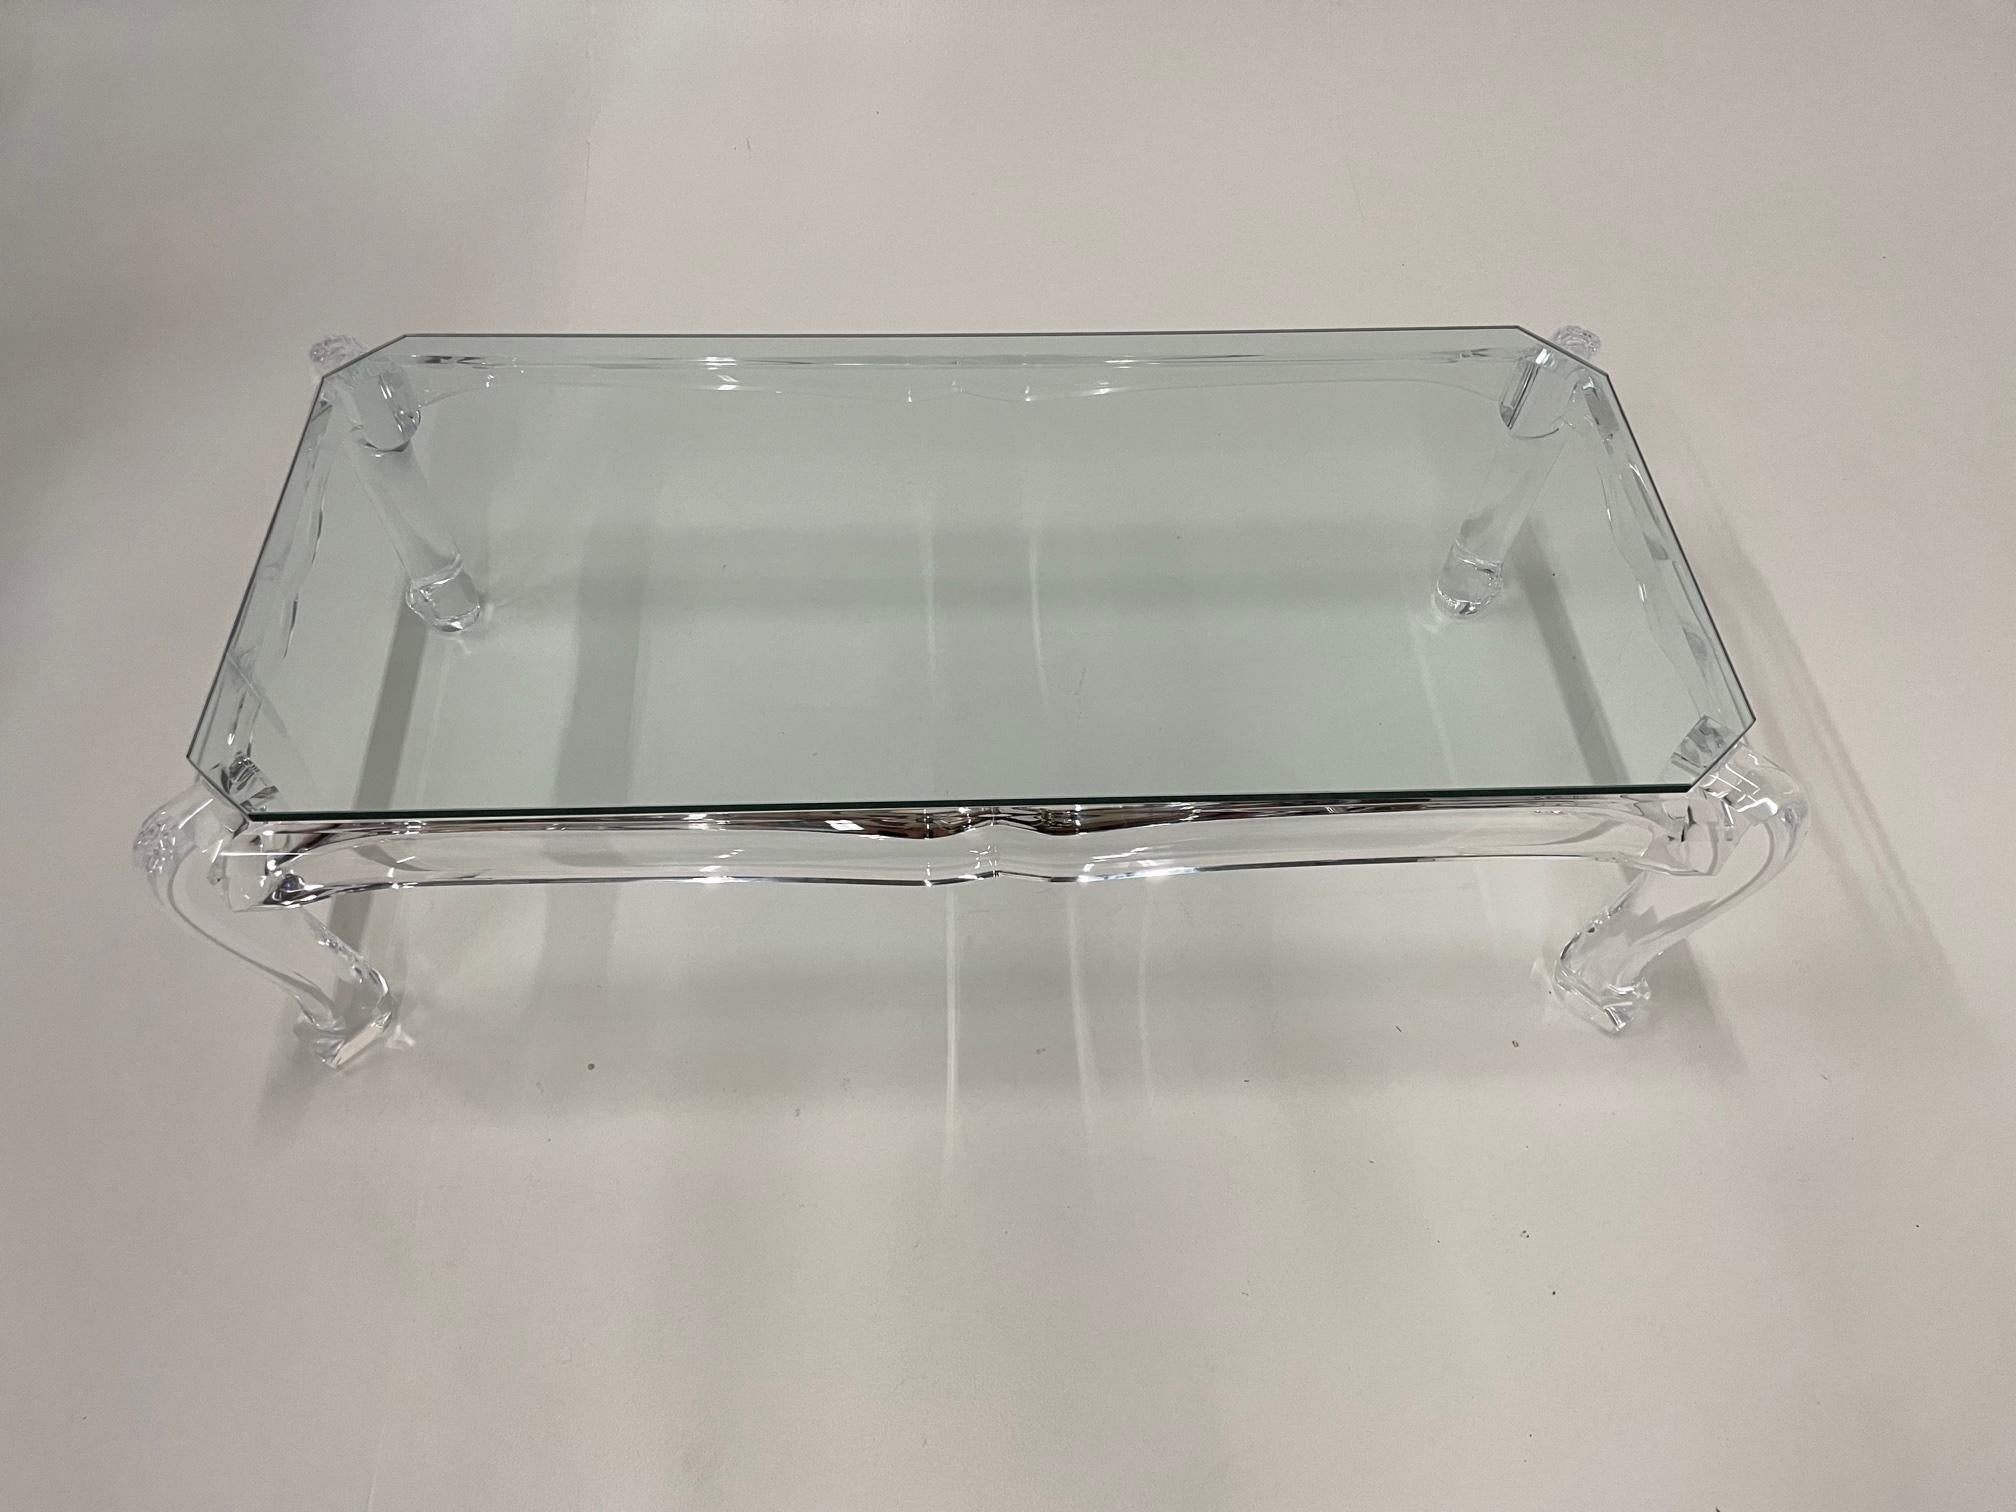 North American Super Hot Lucite Sculptural Mid-Century Modern Coffee Table For Sale